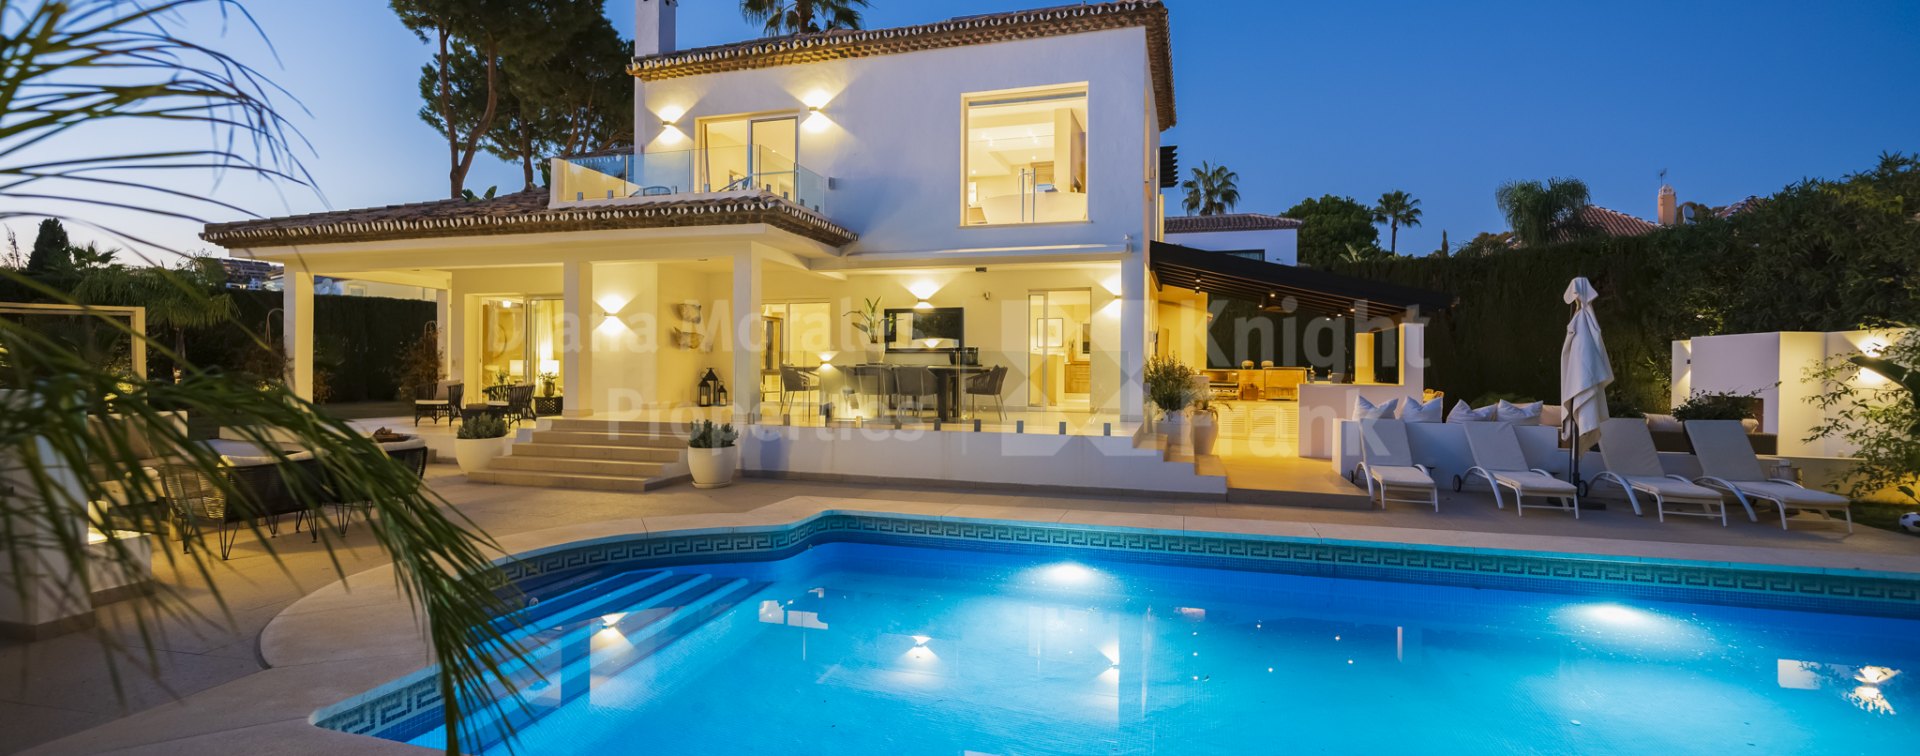 Marbella Country Club, House in fenced urbanisation close to the golf course